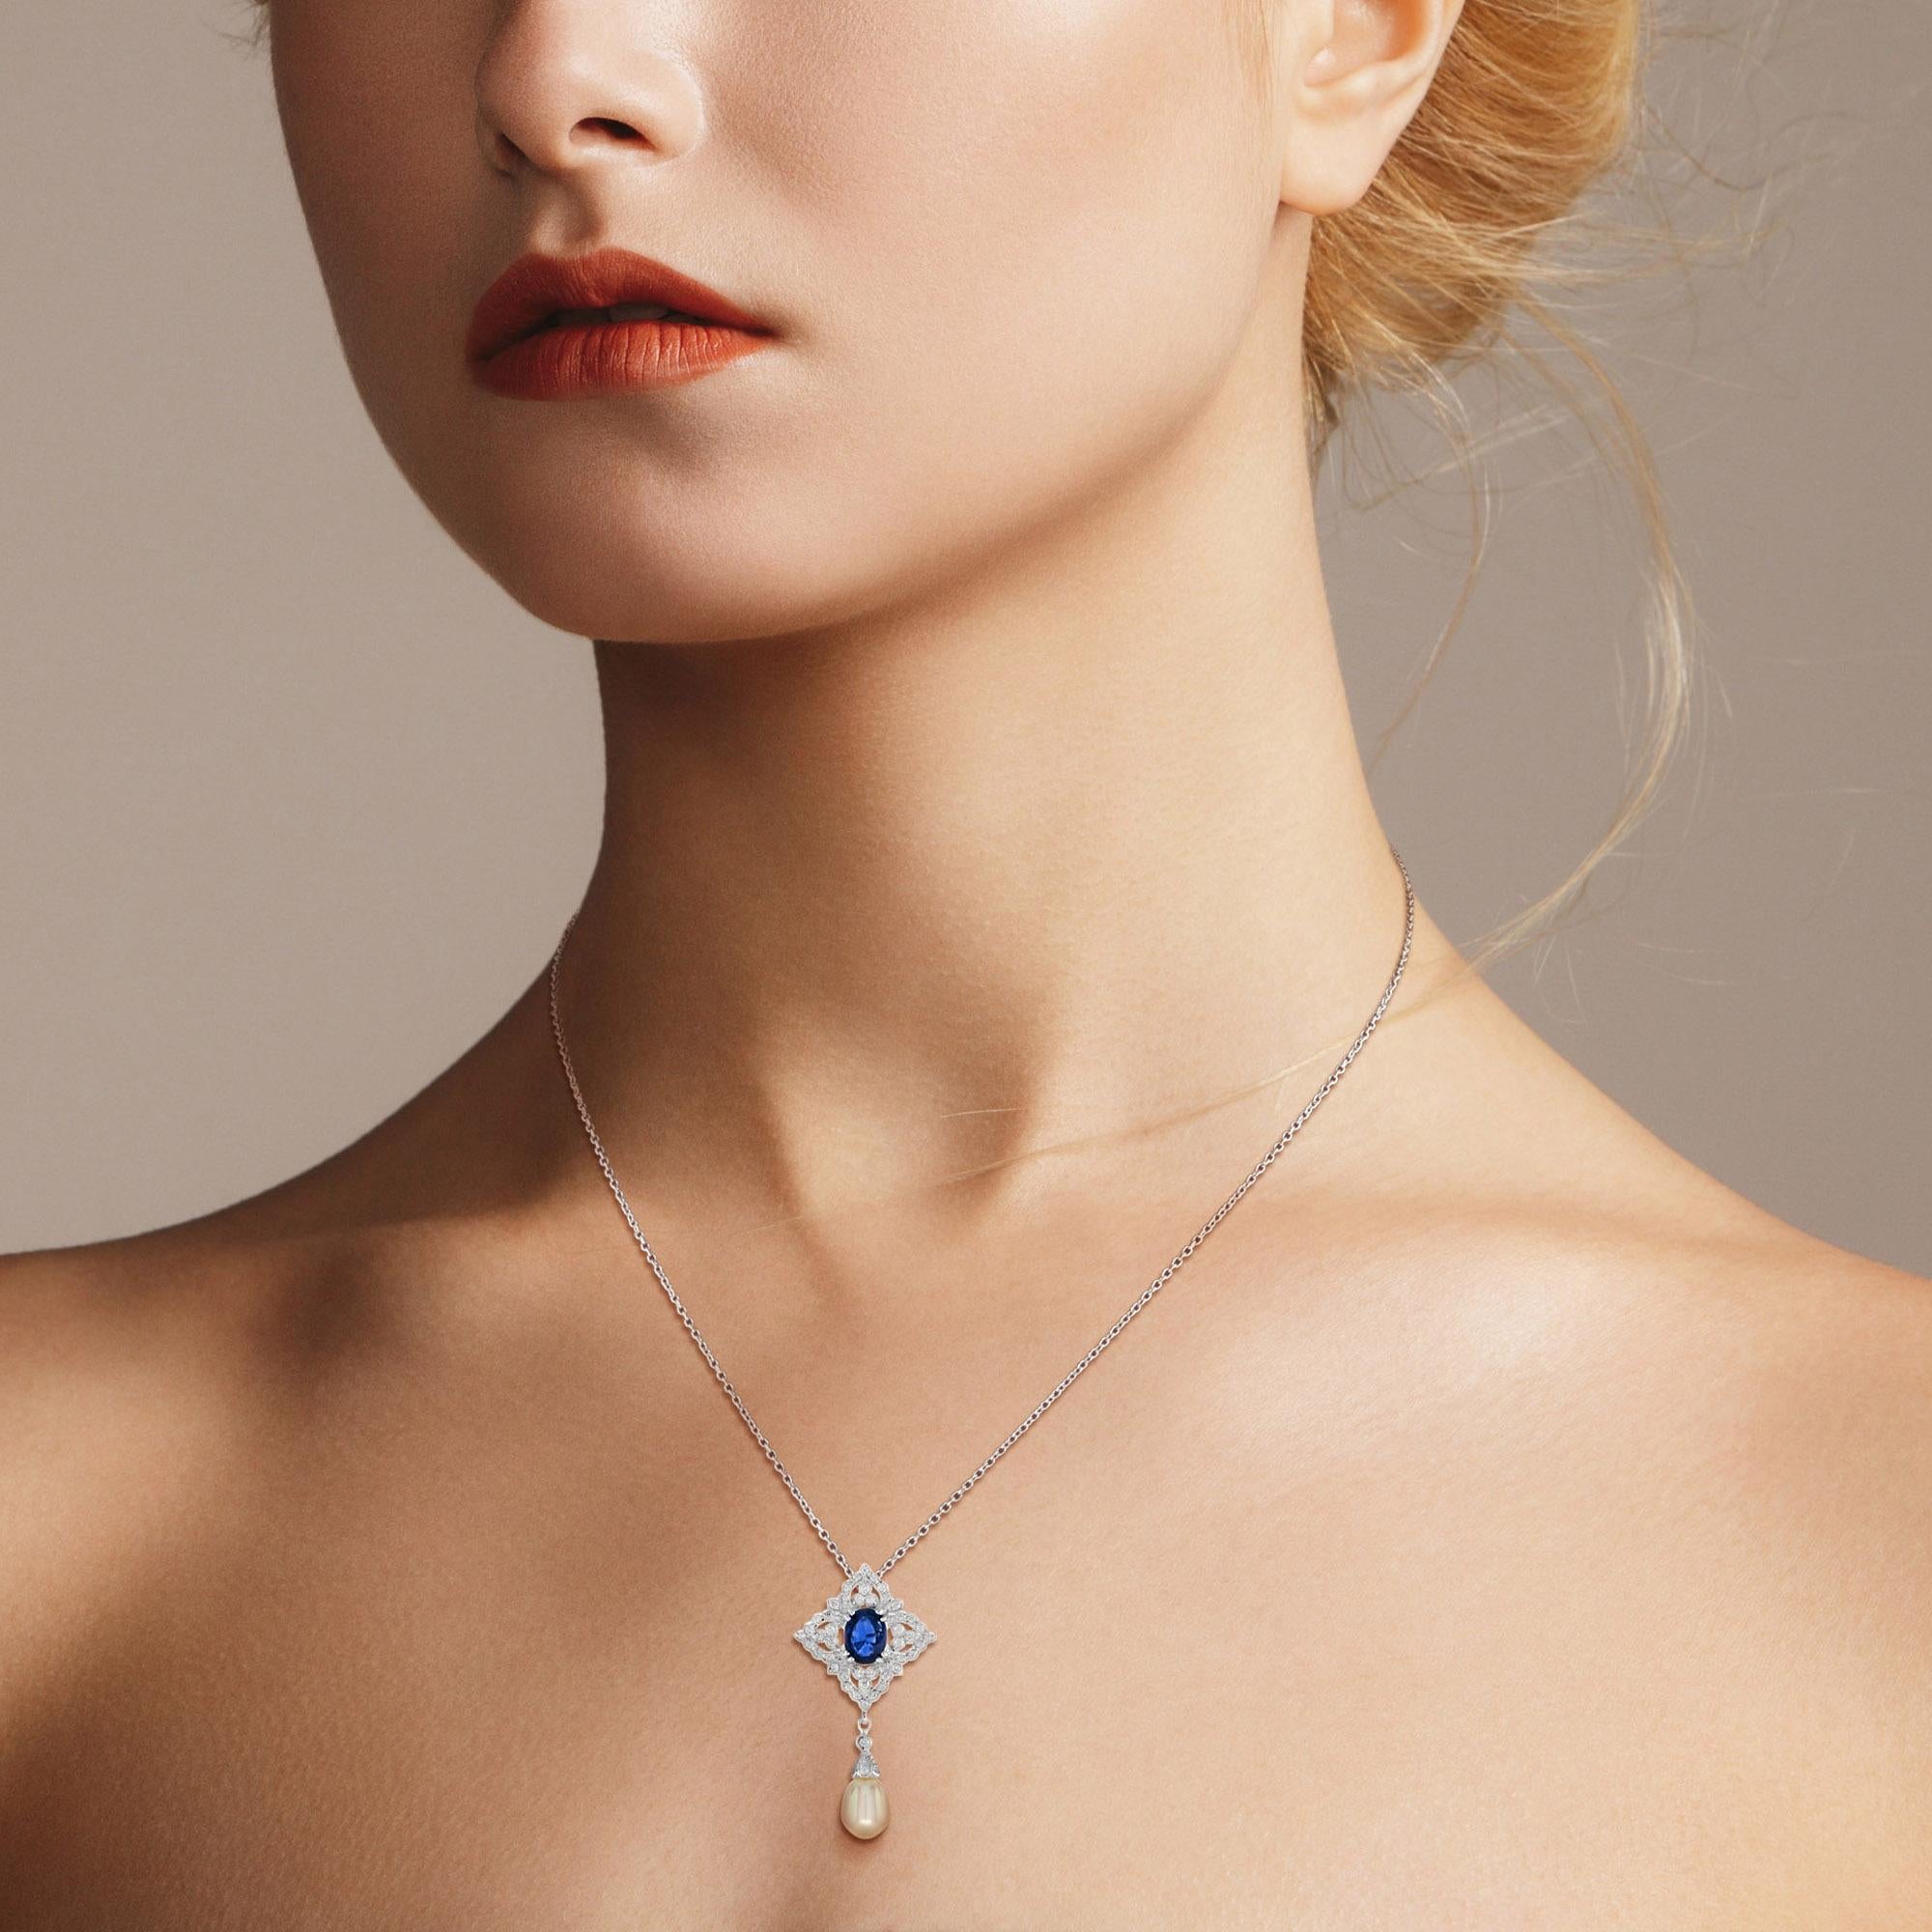 This stunning drop pendant features a luminous natural pearl and deeply hued blue sapphire surrounded by 51 round diamonds in brilliant detail. Both are set in 18k white gold.

Pendant Information
Metal: 18K White Gold
Width: 20 mm.
Length: 39